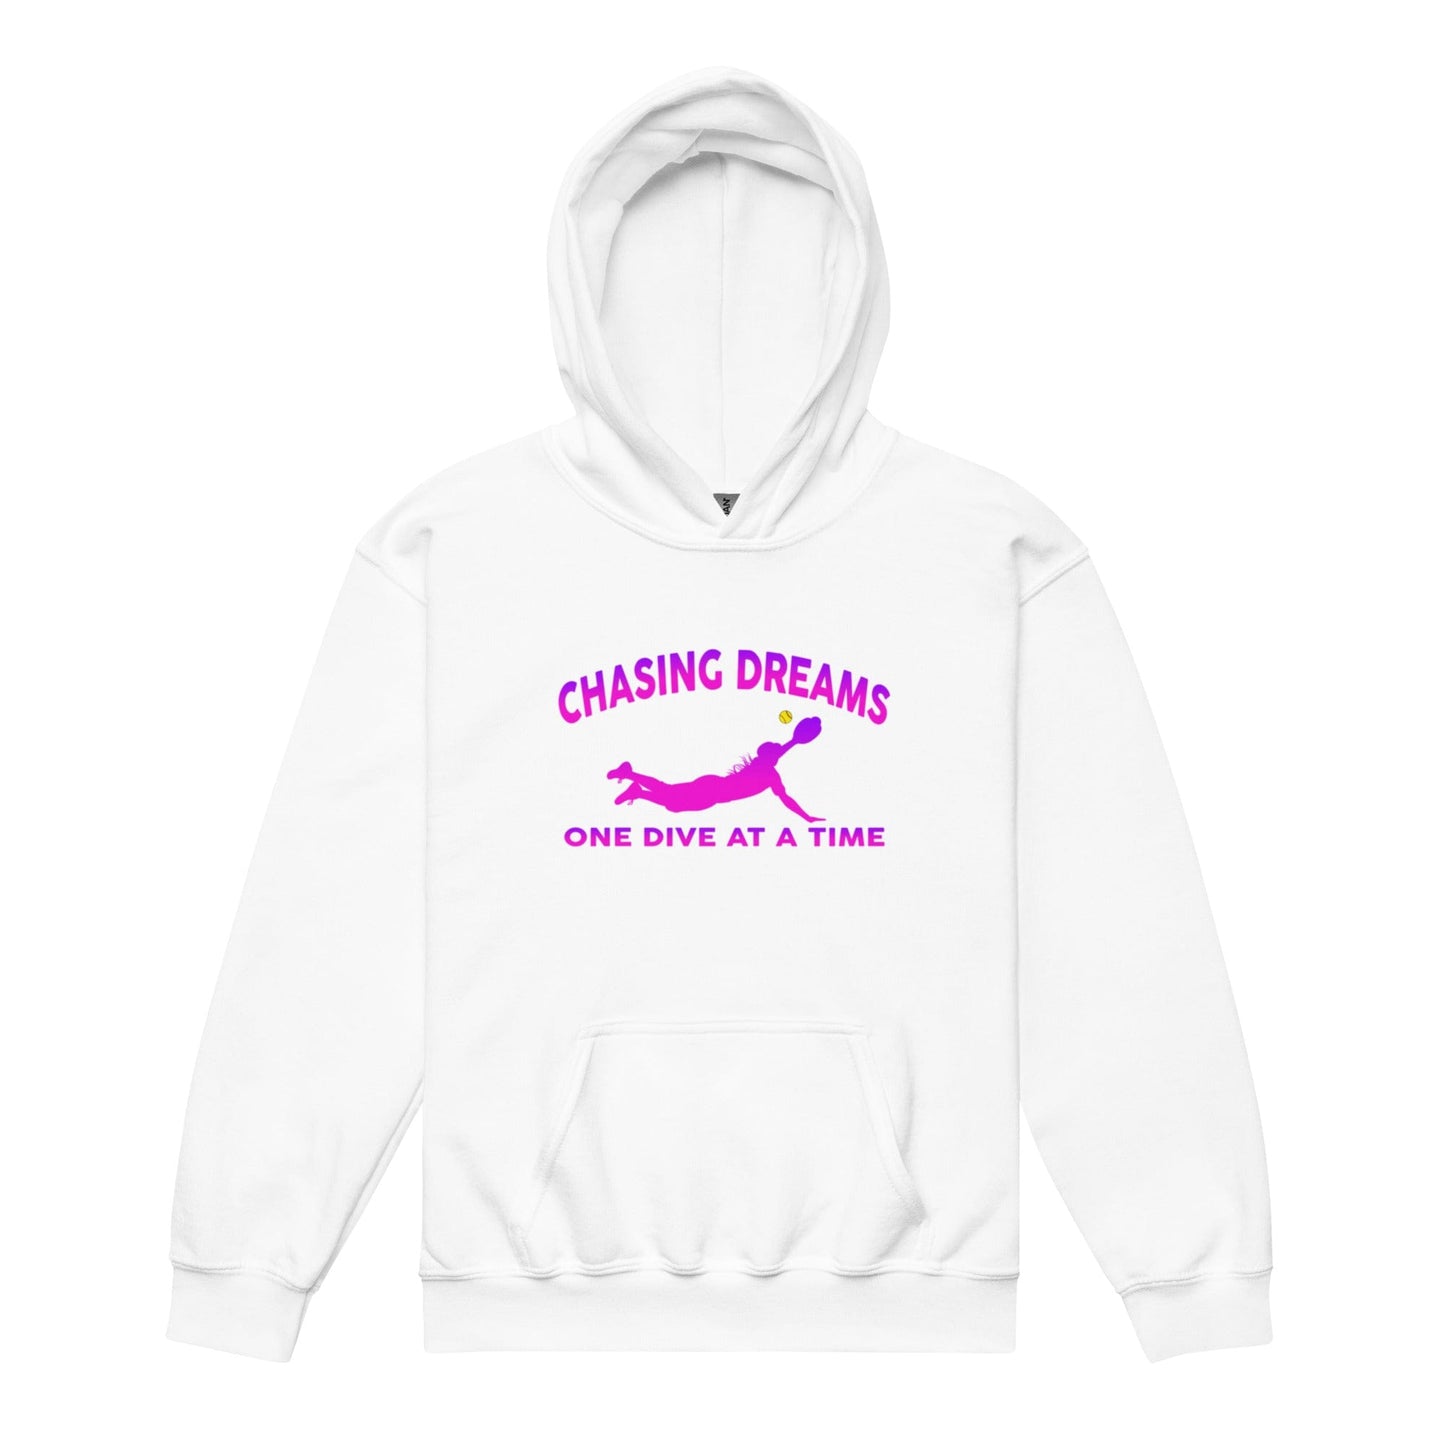 Chasing Dreams One Dive At A Time - Youth Hoodie